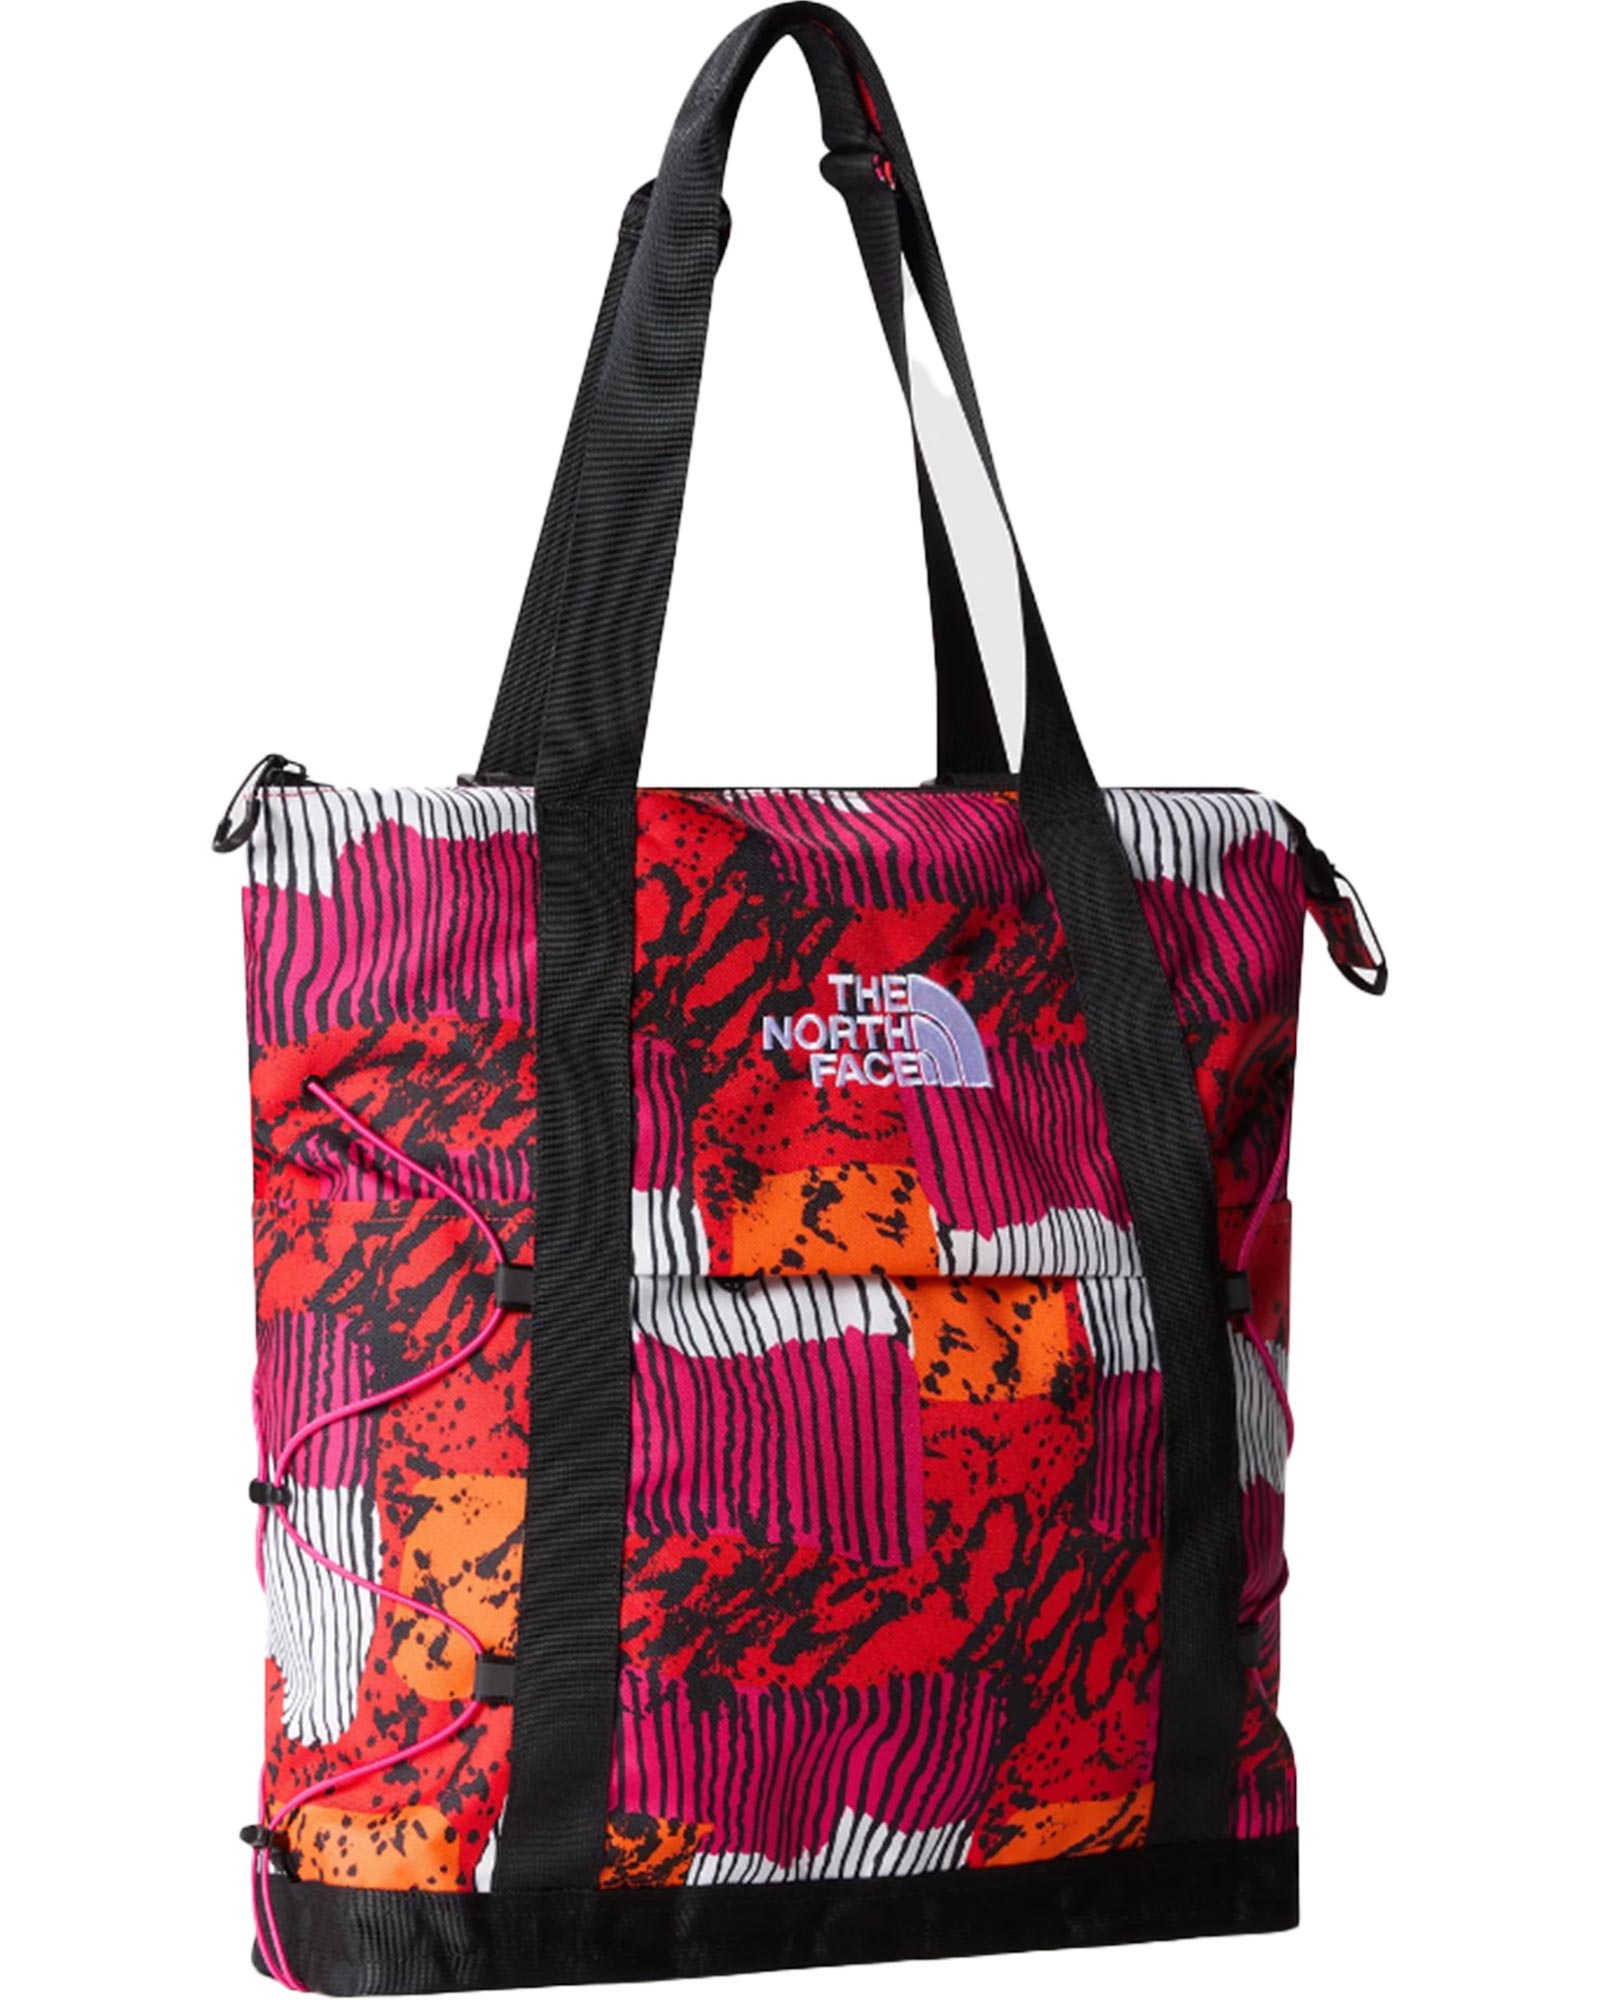 The North Face Borealis Tote - Fiery Red Dip Dye Large Print/TNF Black